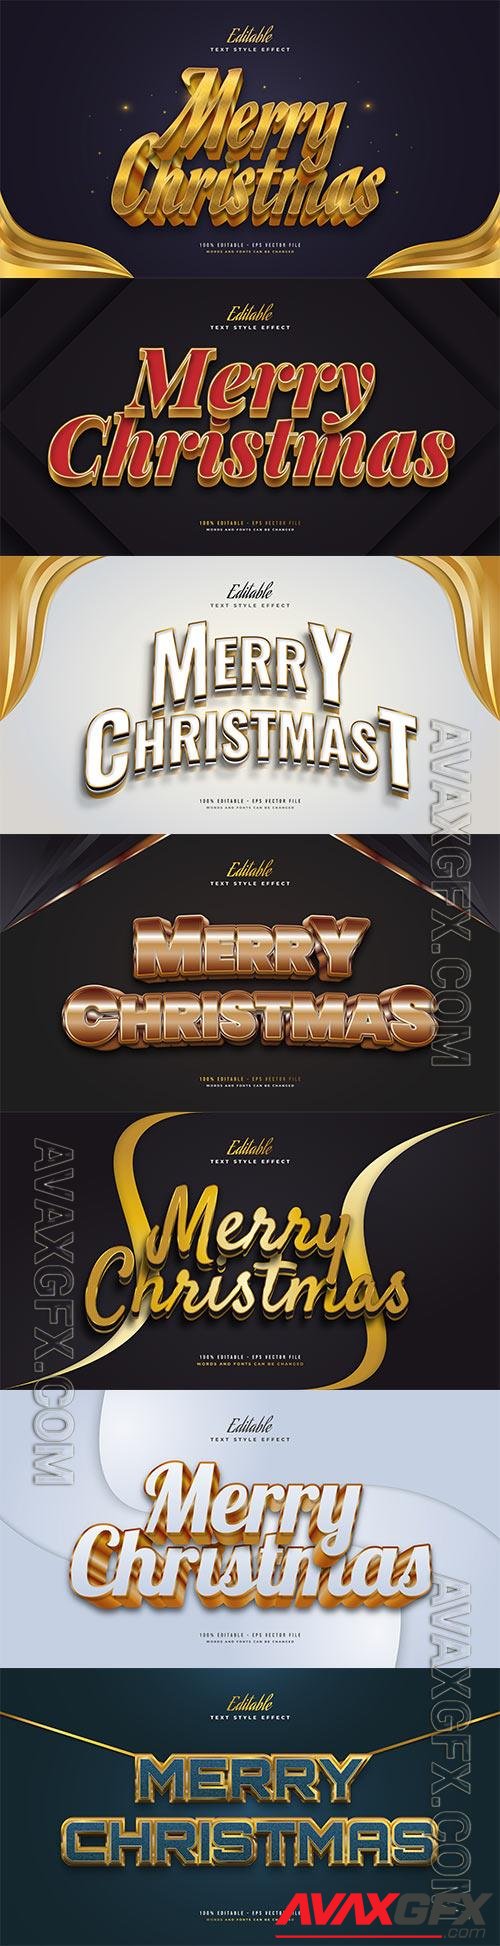 Merry christmas and happy new year 2022 editable vector text effects vol 18